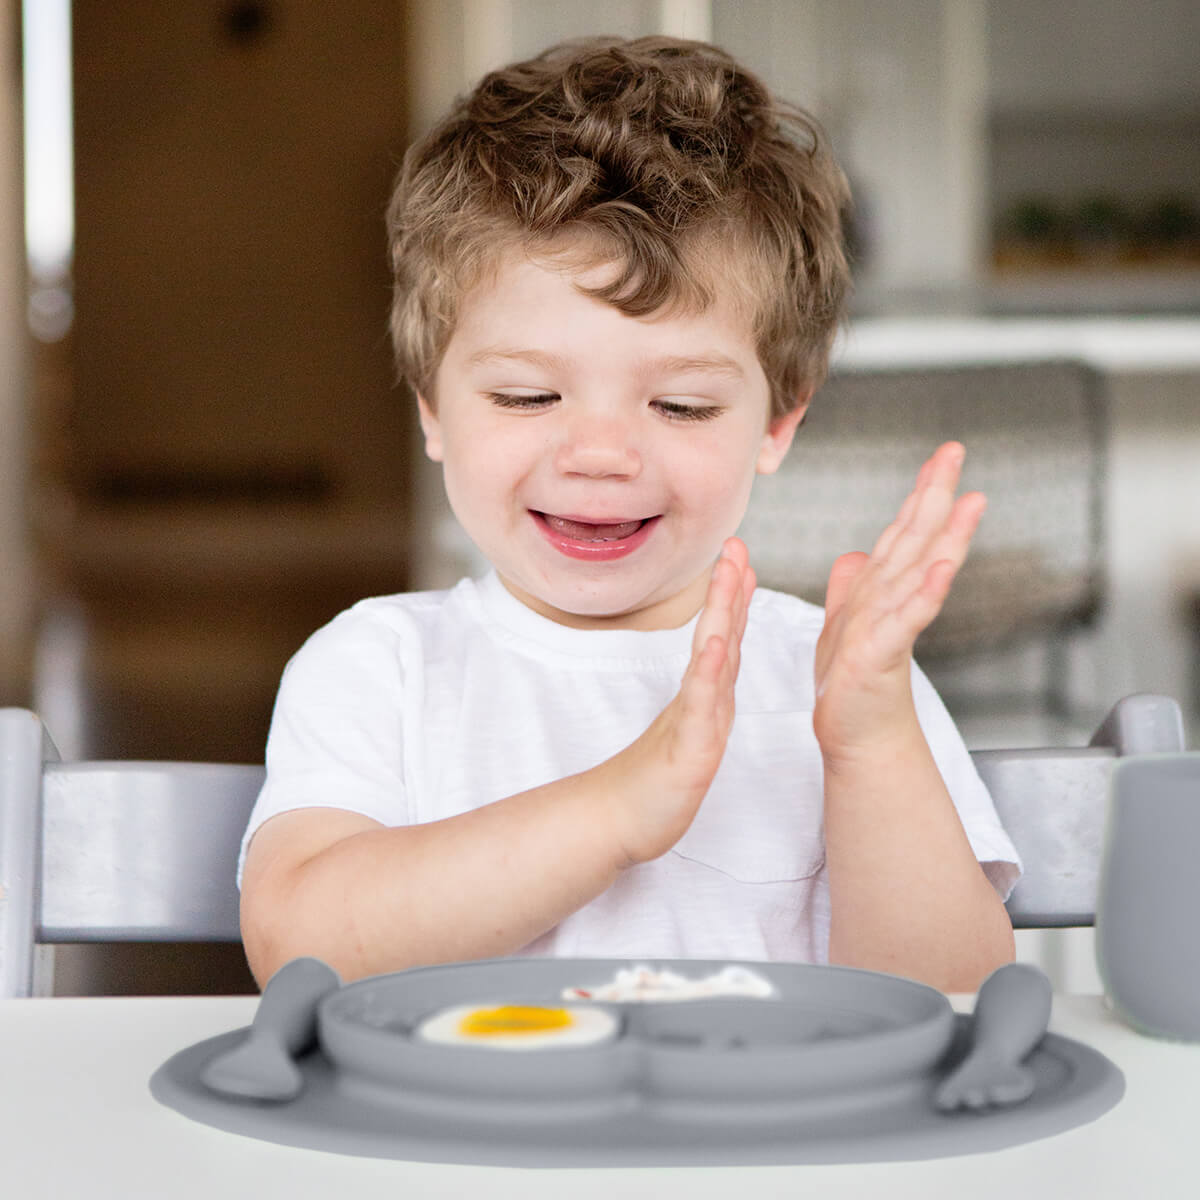 Mini Feeding Set in Gray by ezpz / Silicone Plate, Fork & Spoon for Toddlers